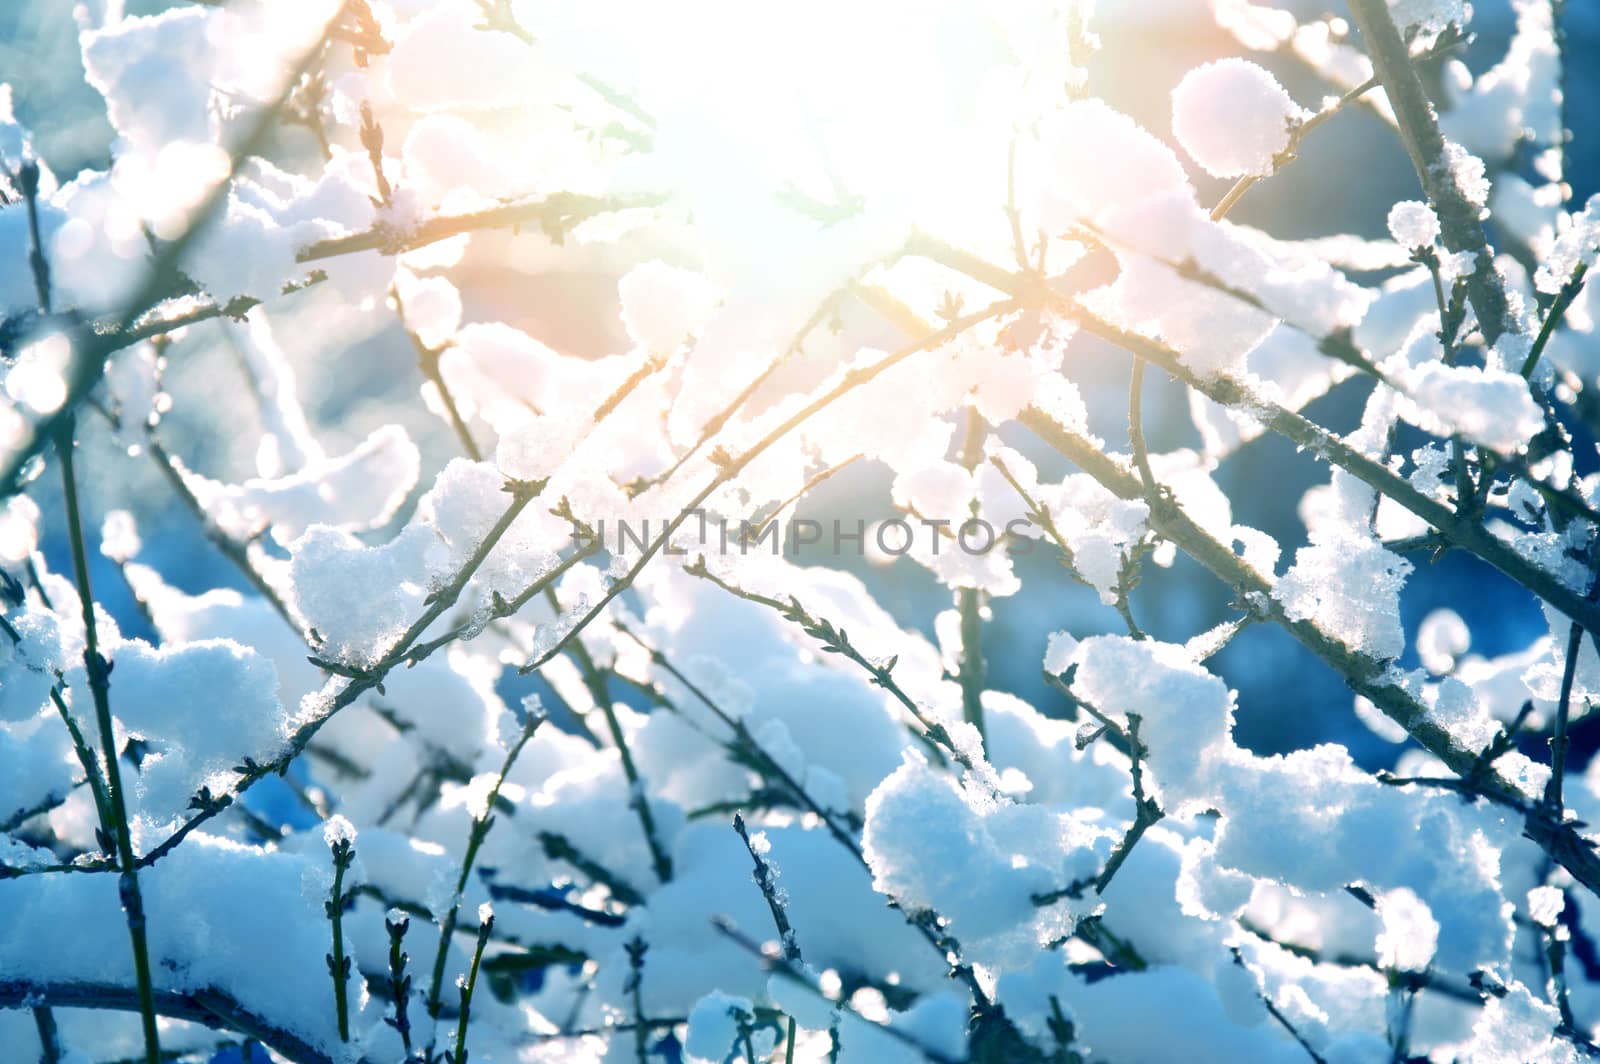 Snow and ice on branches. Winter time.